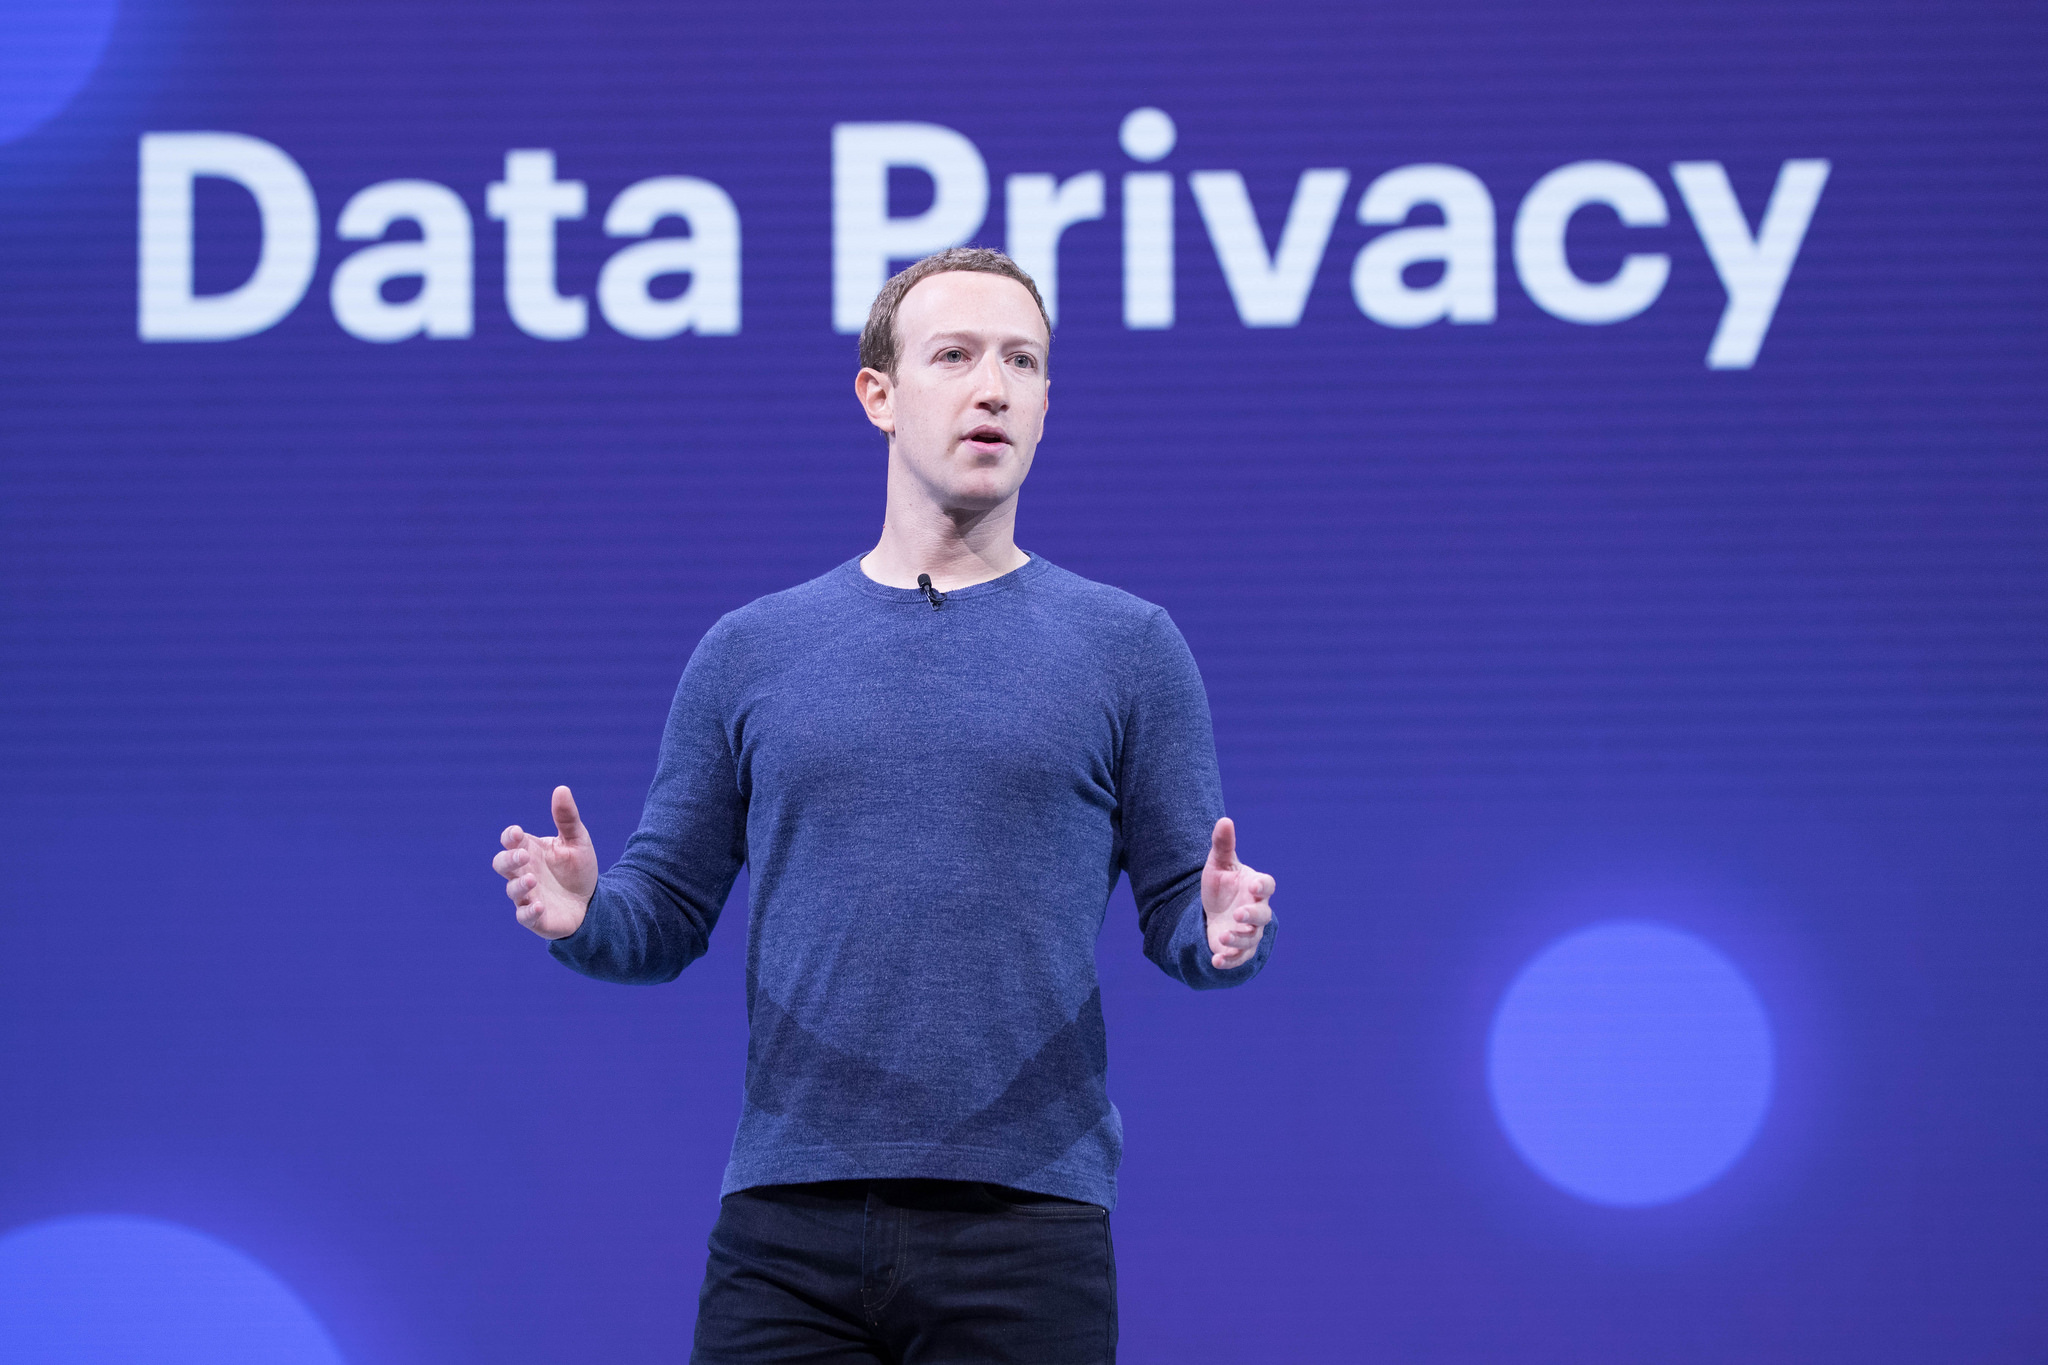 An image of Mark Zuckerberg standing in front of a backdrop that says &quot;Data Privacy&quot; in large letters.